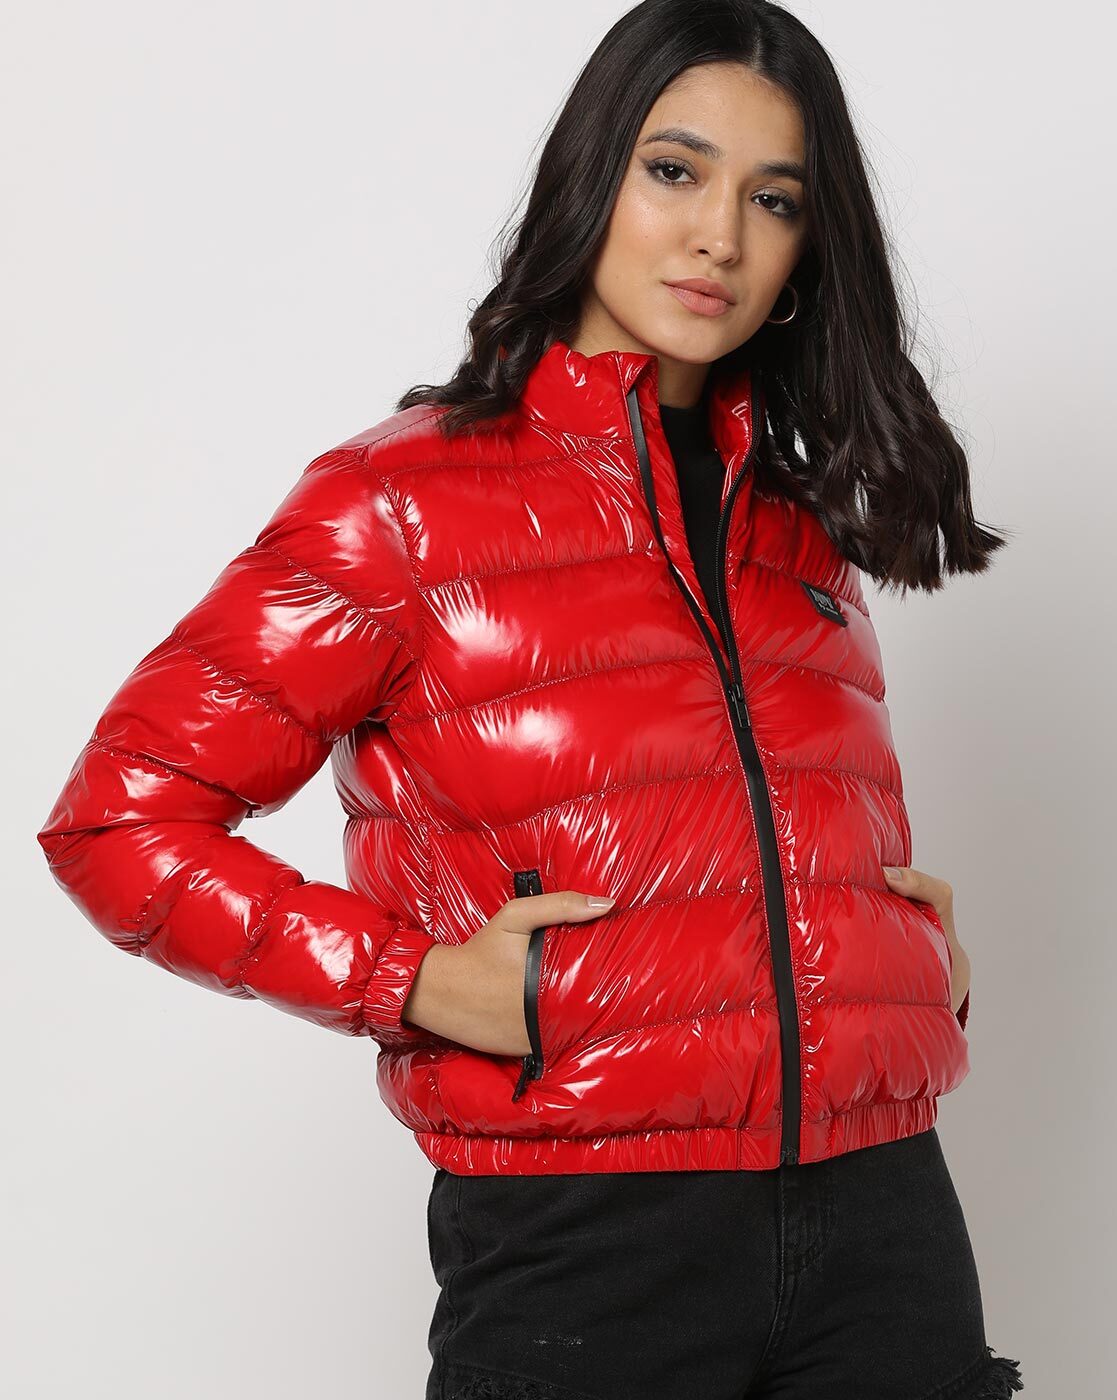 Wild Fable Jacket Red Puffer Fall Winter Coat  Red puffer coat, Fall  winter coat, Red puffer jacket